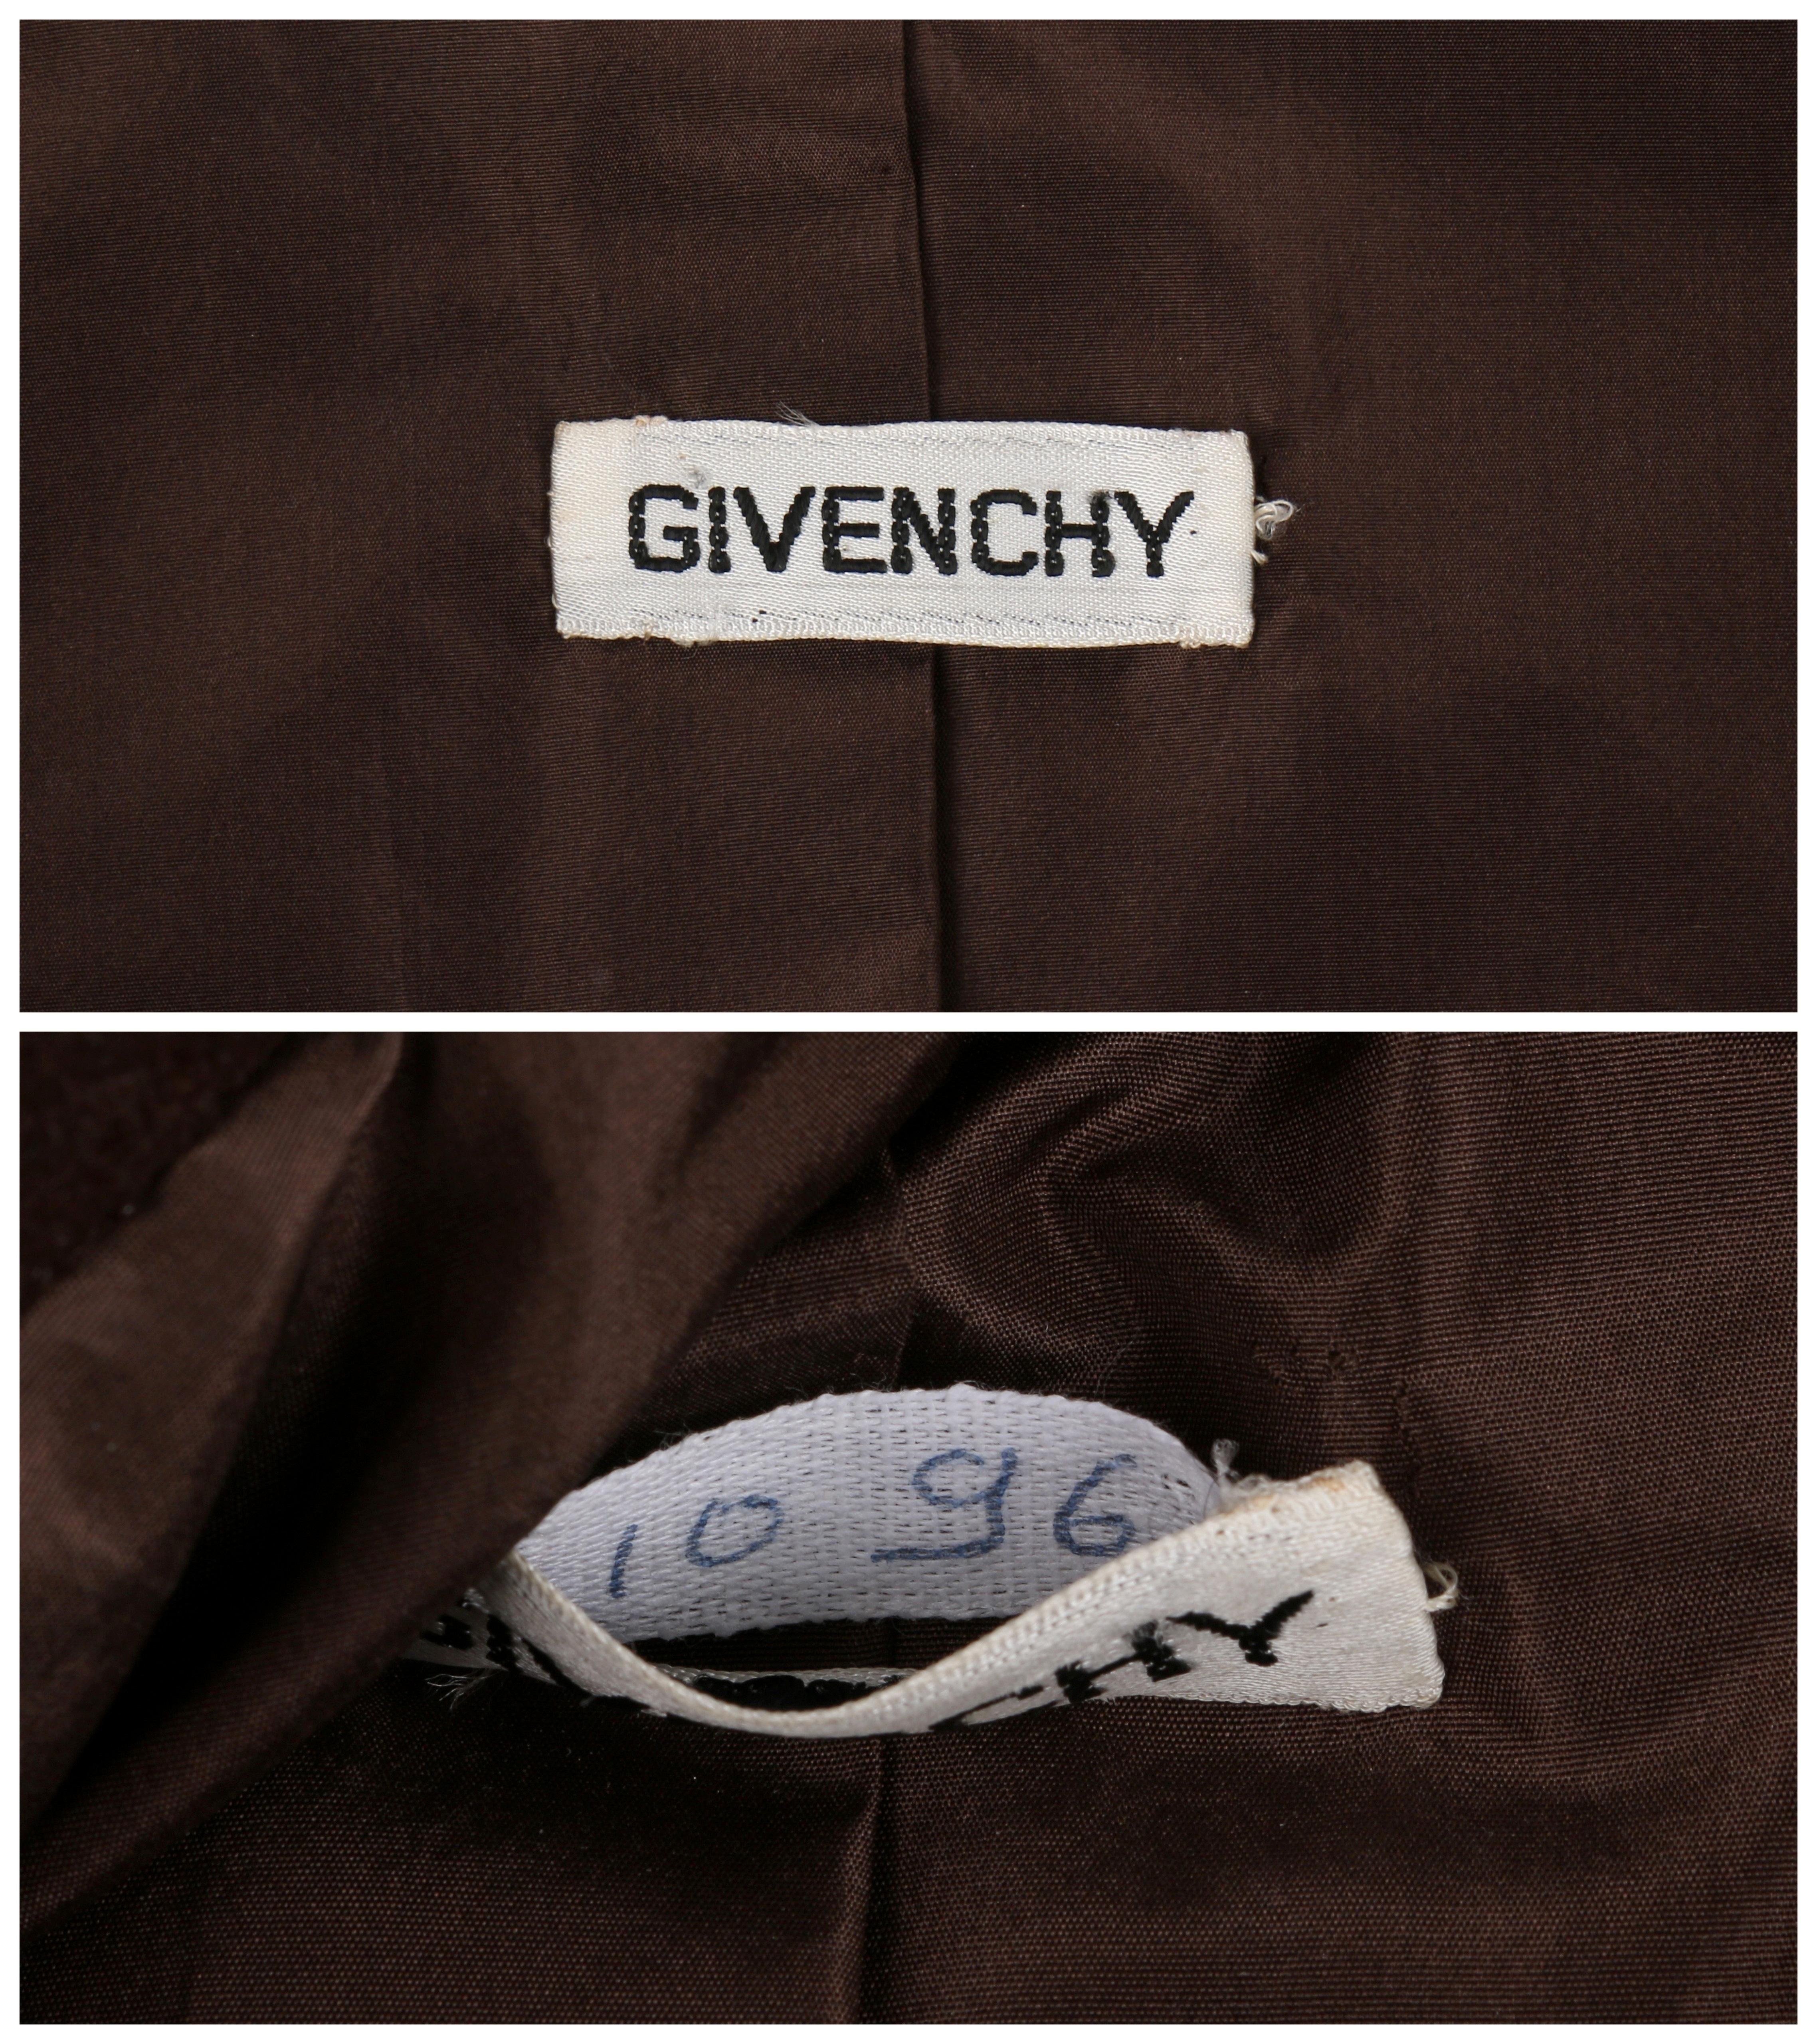 GIVENCHY c. 1960’s Early Haute Couture Dark Brown Wool Princess Coat Jacket In Good Condition For Sale In Thiensville, WI